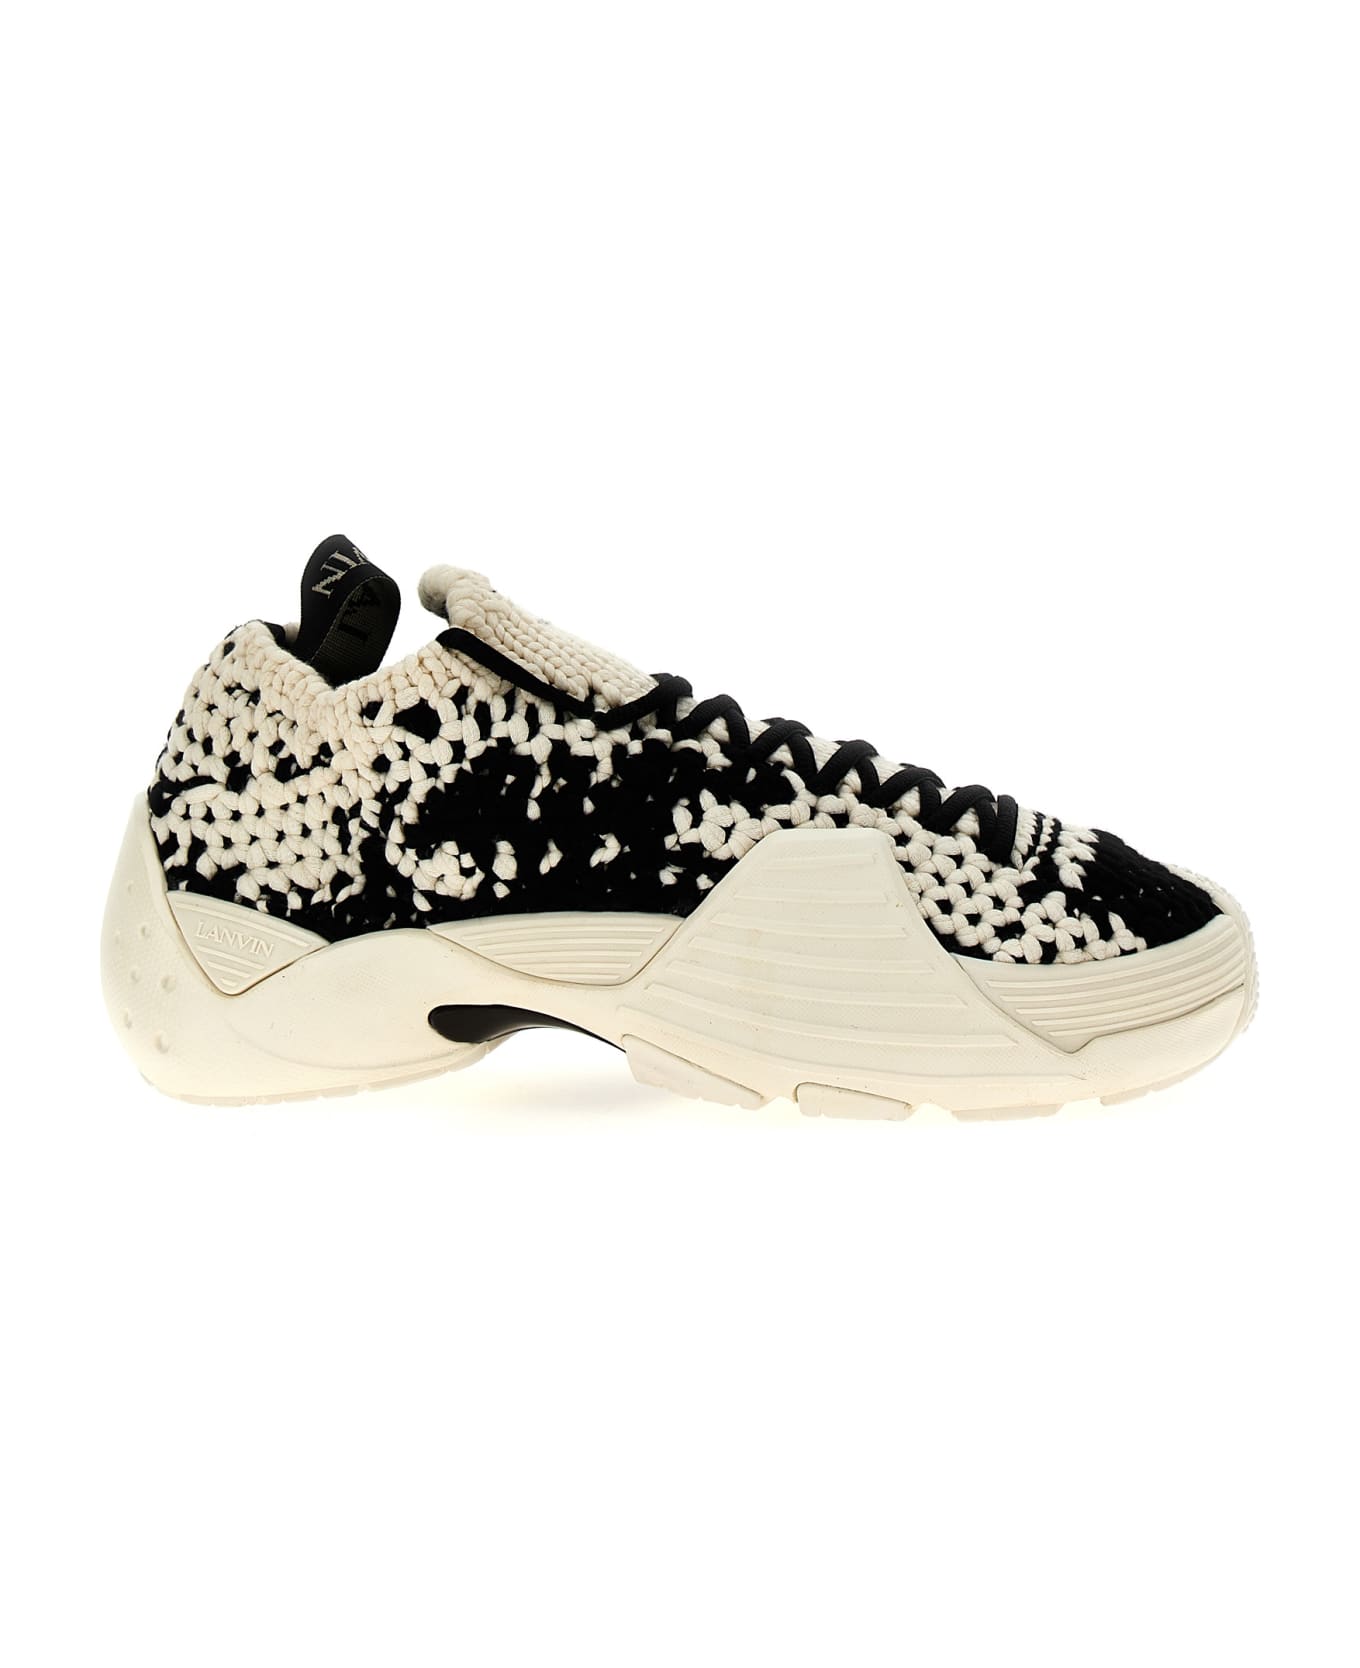 Lanvin 'cotton Flash-knit' Sneakers - Ivory スニーカー